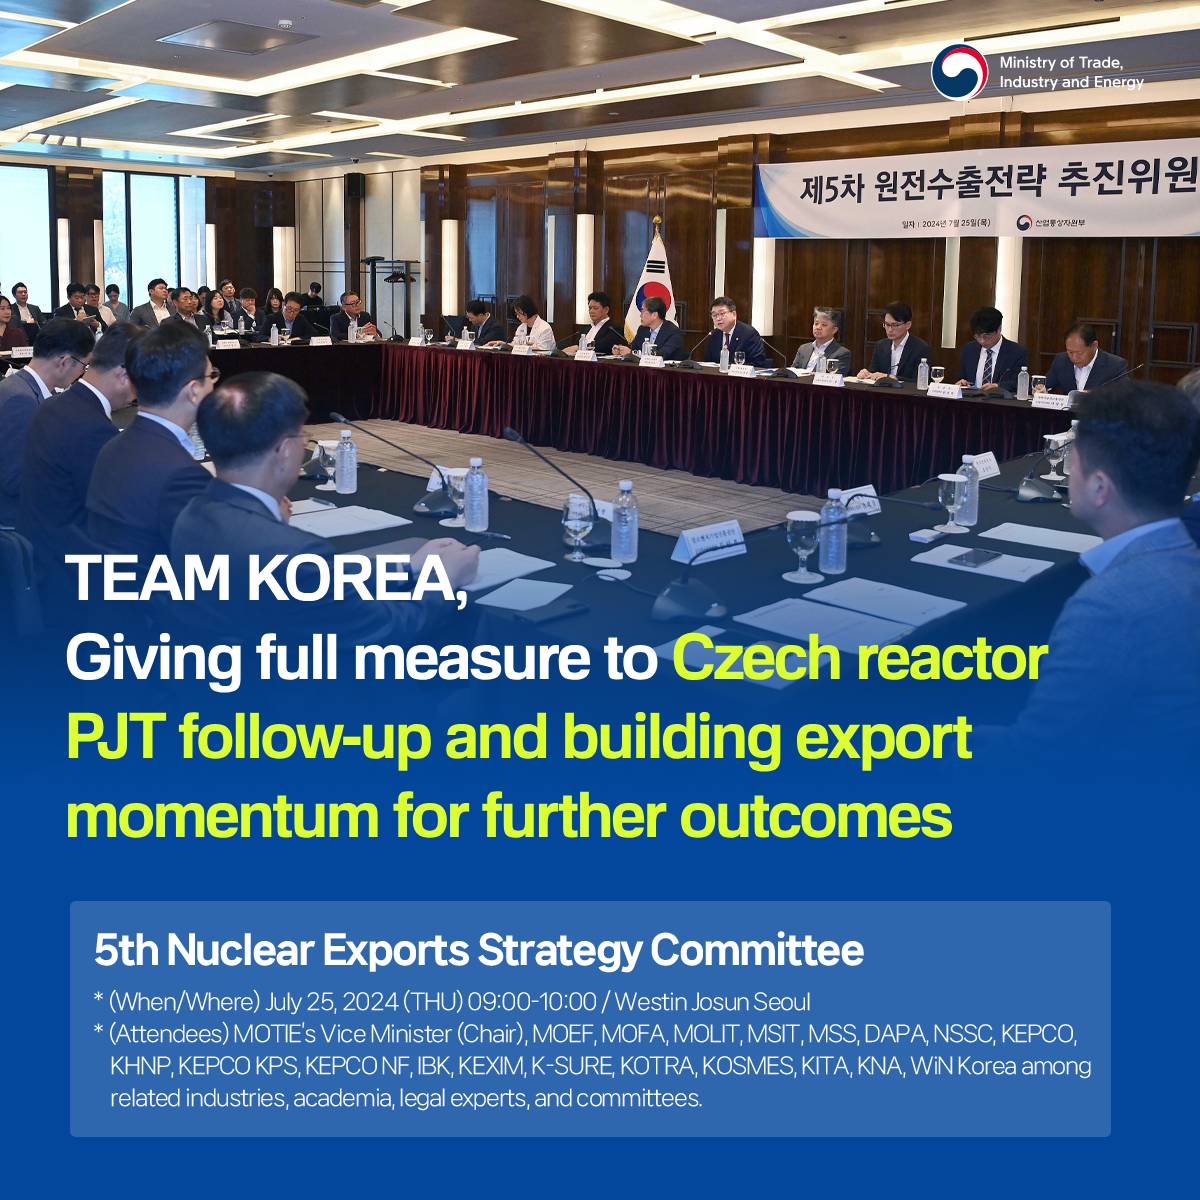 Korea’s Nuclear Exports Strategy Committee consolidates follow-up efforts to Czech PJT, building further export momentum